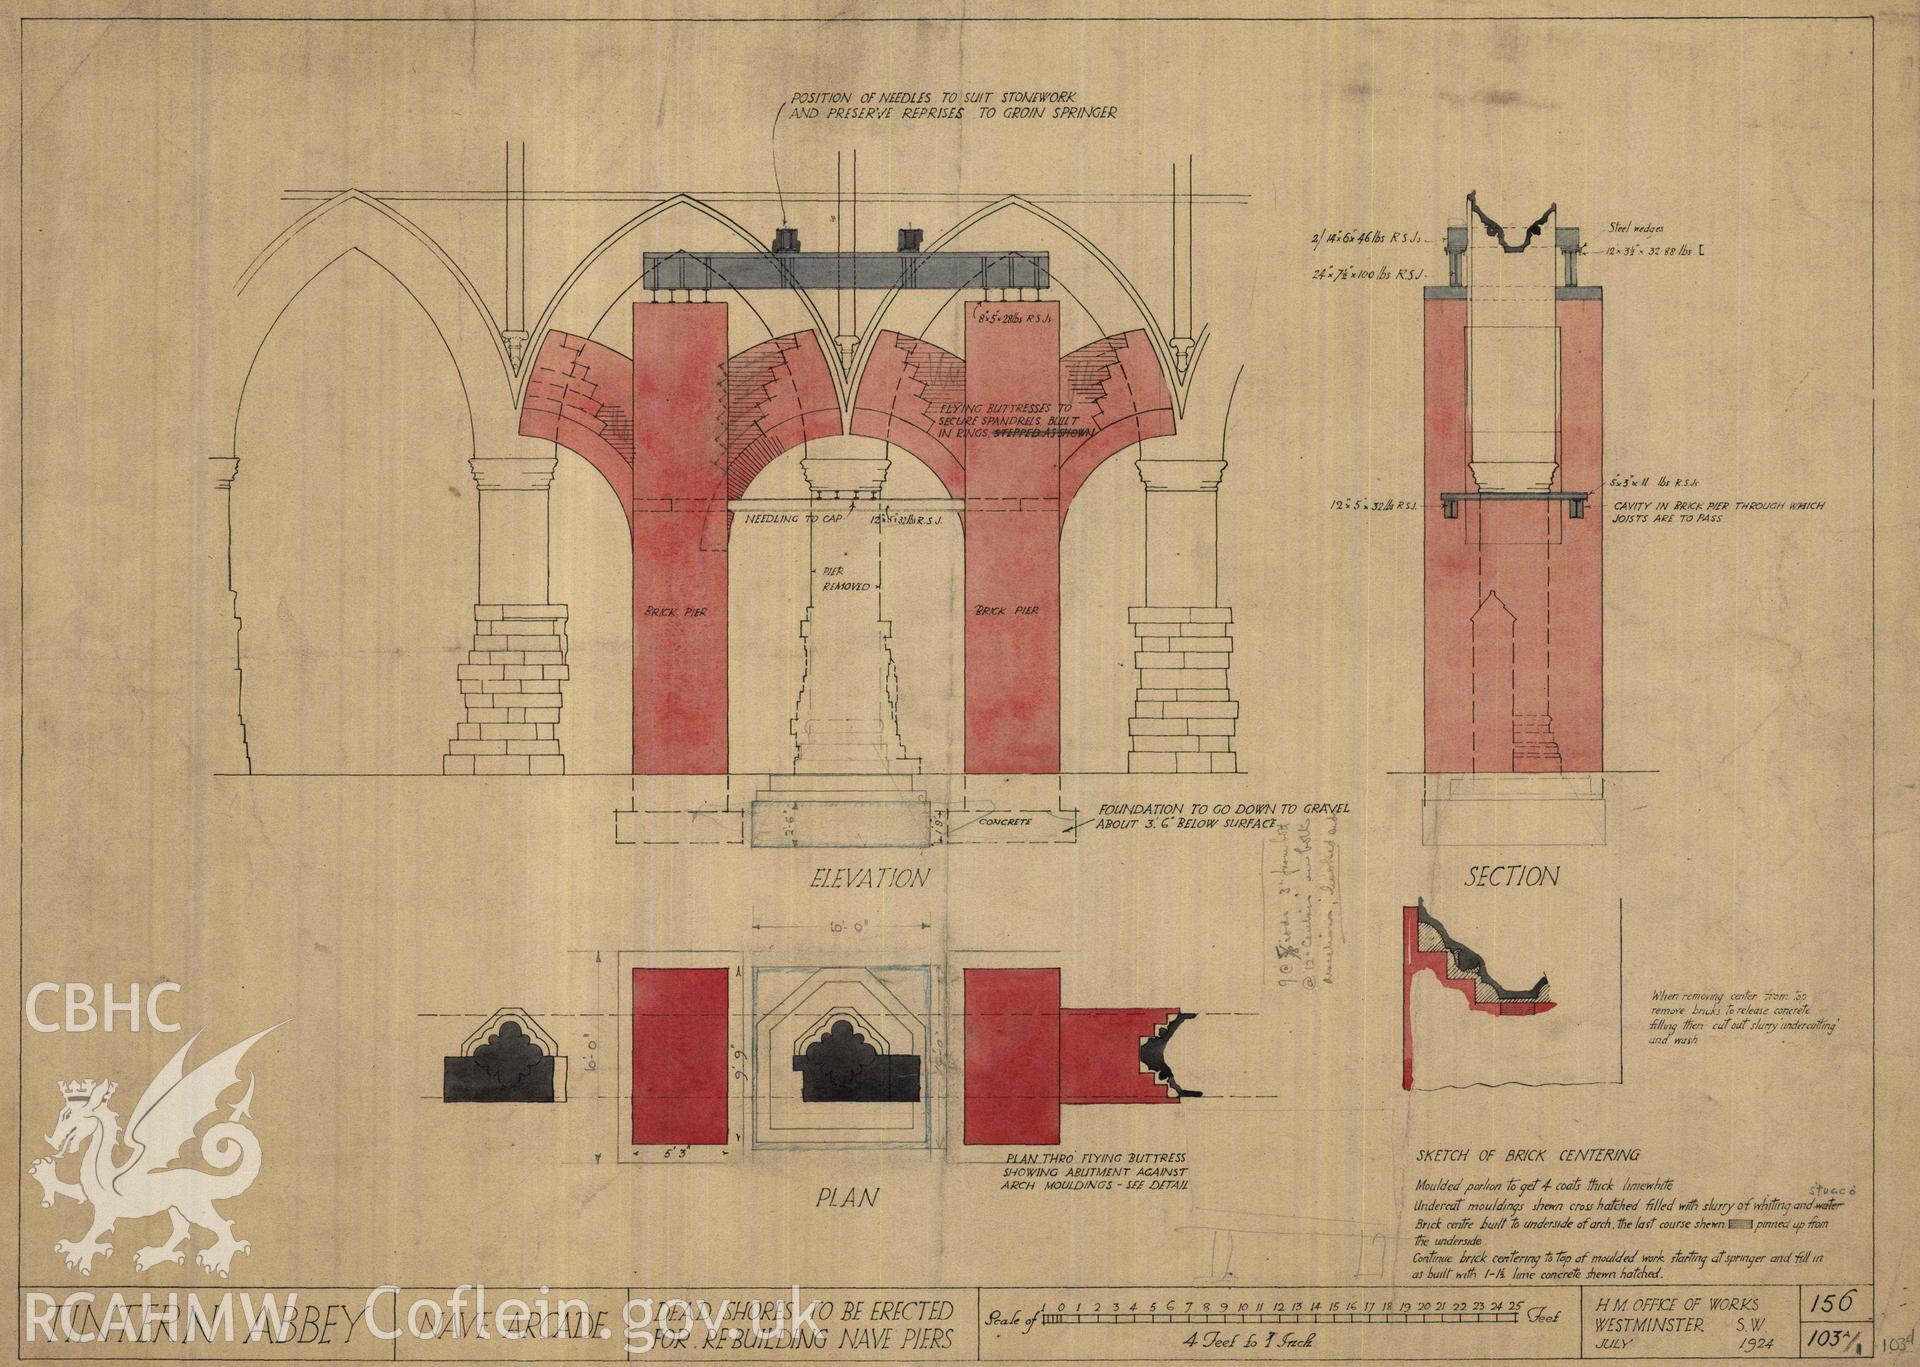 Cadw guardianship monument drawing of Tintern Abbey. Plan through Flying Buttress. Cadw ref. No. 156/103a. Scale 1:48.